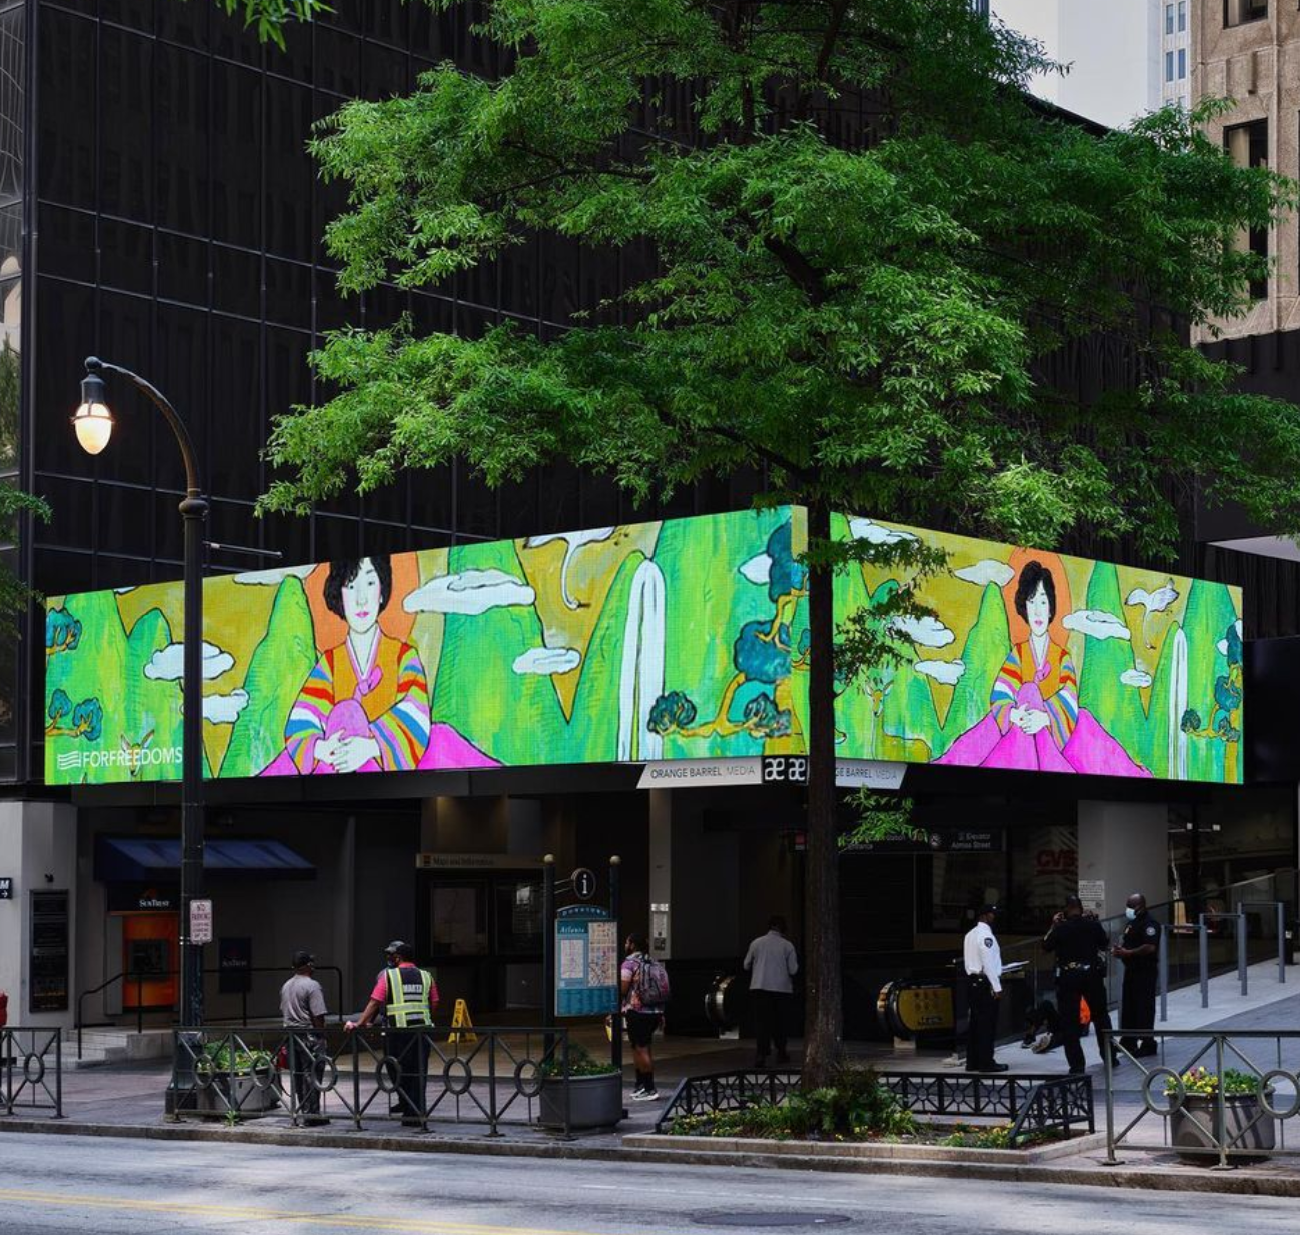 OU Alum Nicole Kang's art displayed above Peachtree Station in Downtown Atlanta